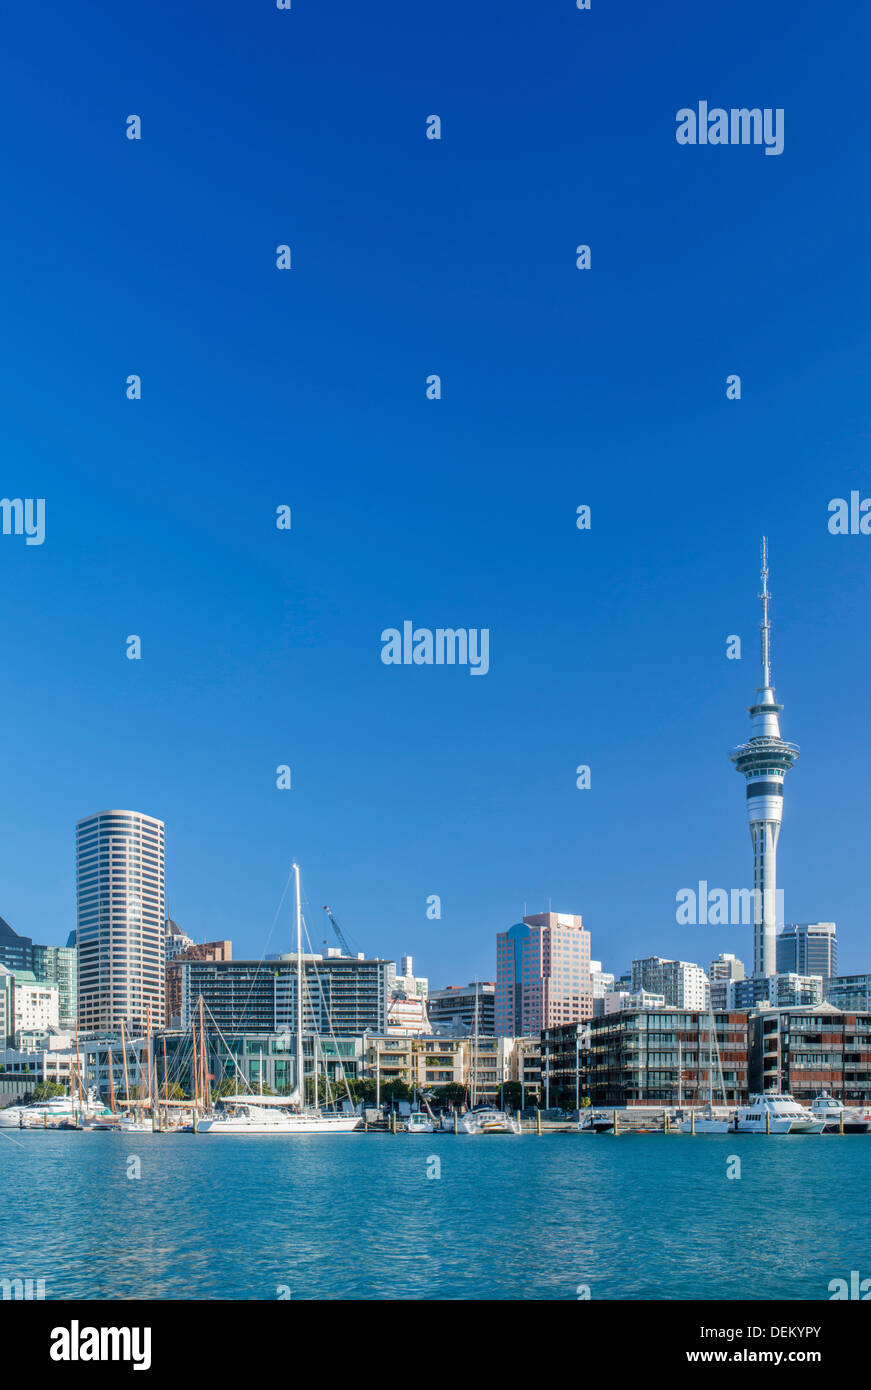 Auckland skyline on waterfront, Auckland, New Zealand Stock Photo